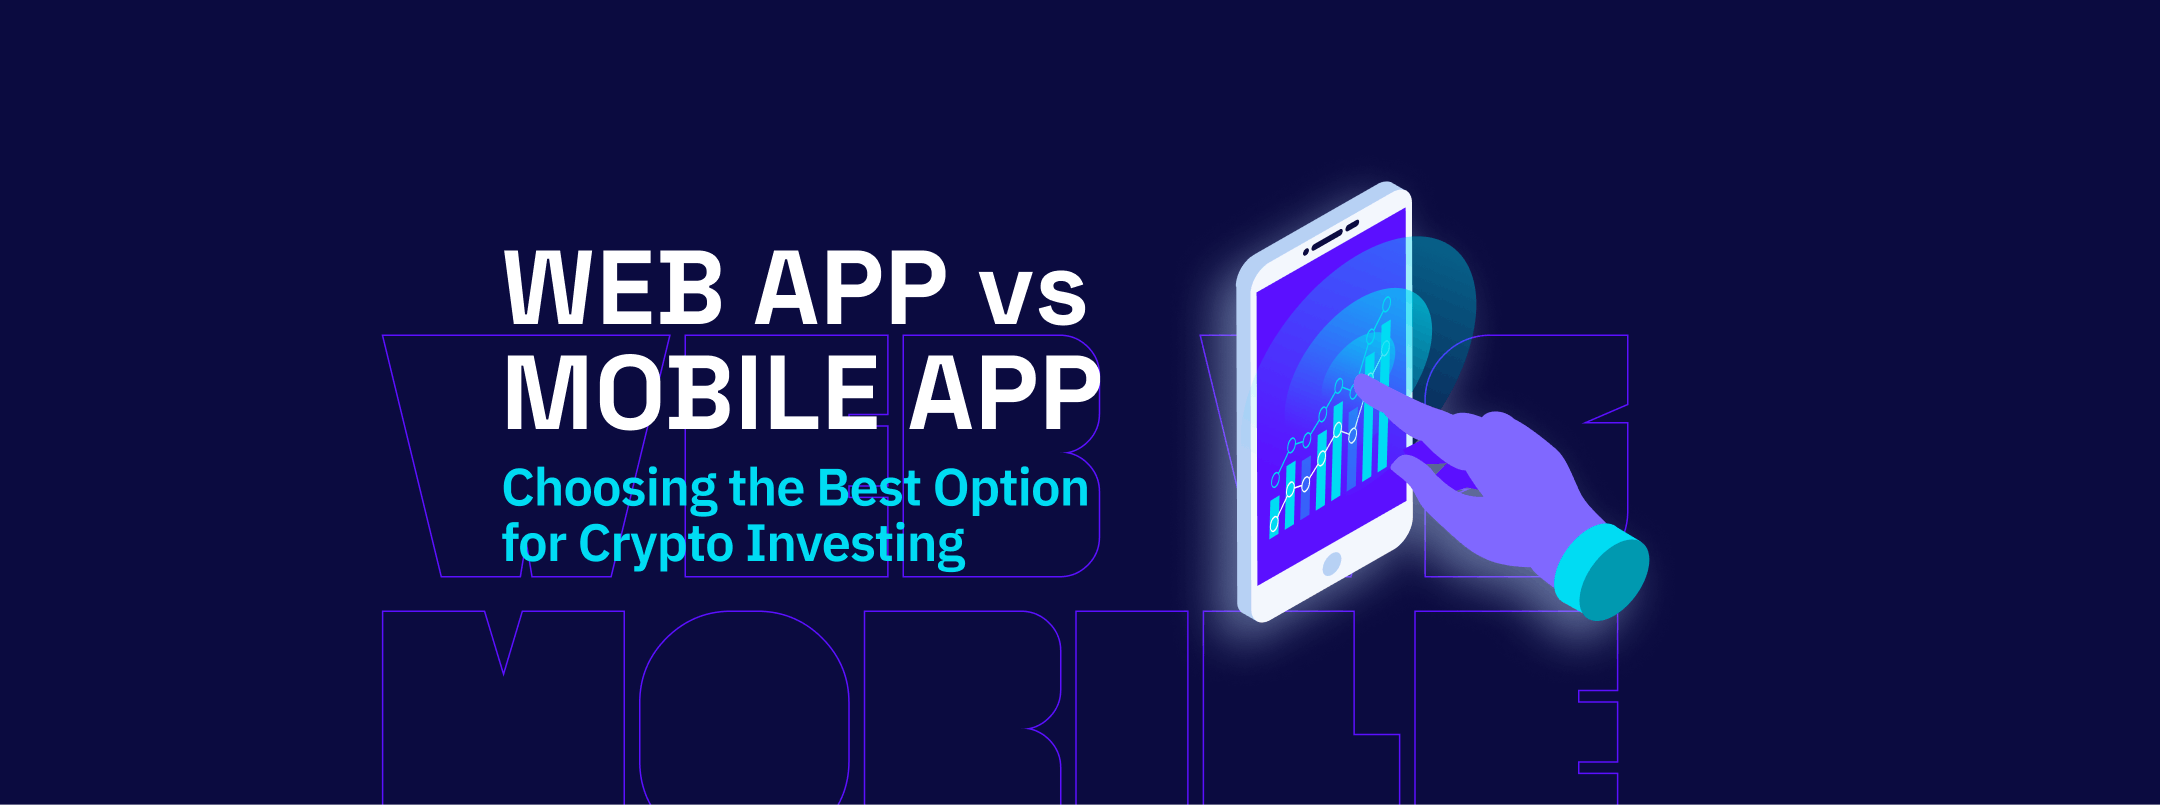 Web App vs Mobile App: Which Is the Best Option  for Crypto Investing?